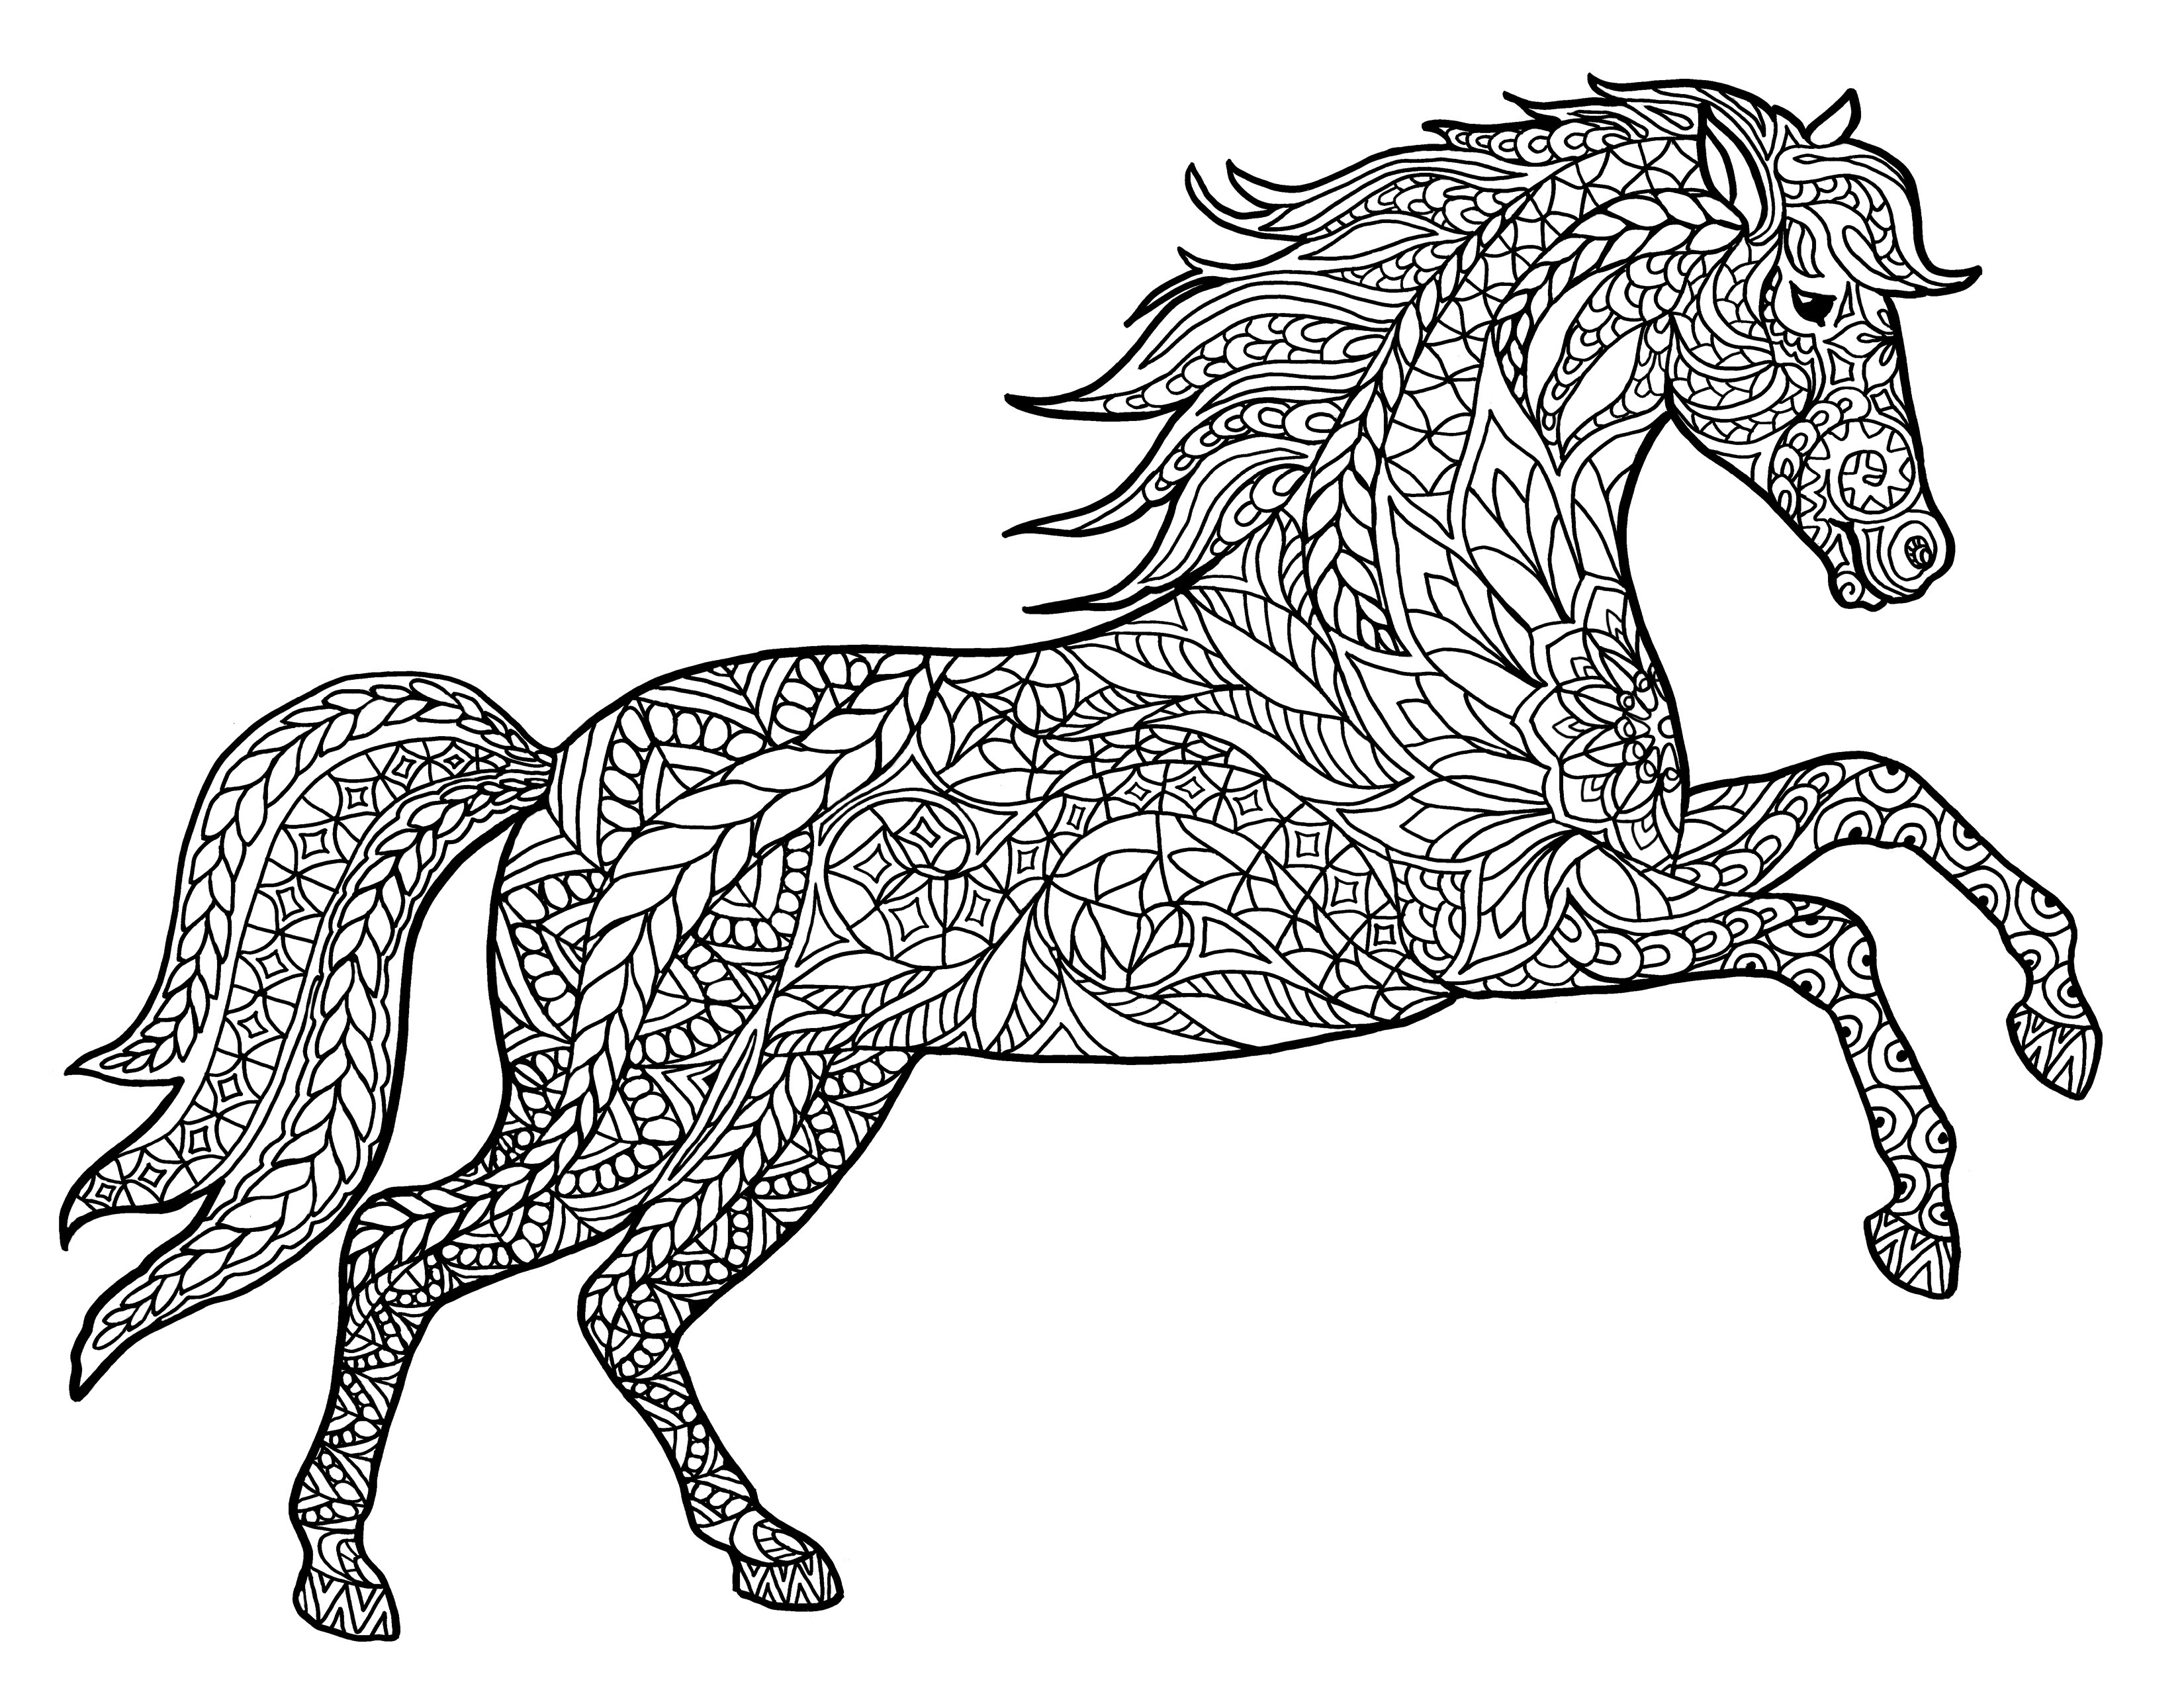 Coloring Pages For Adults Horses
 Animal Coloring Pages for Adults Best Coloring Pages For